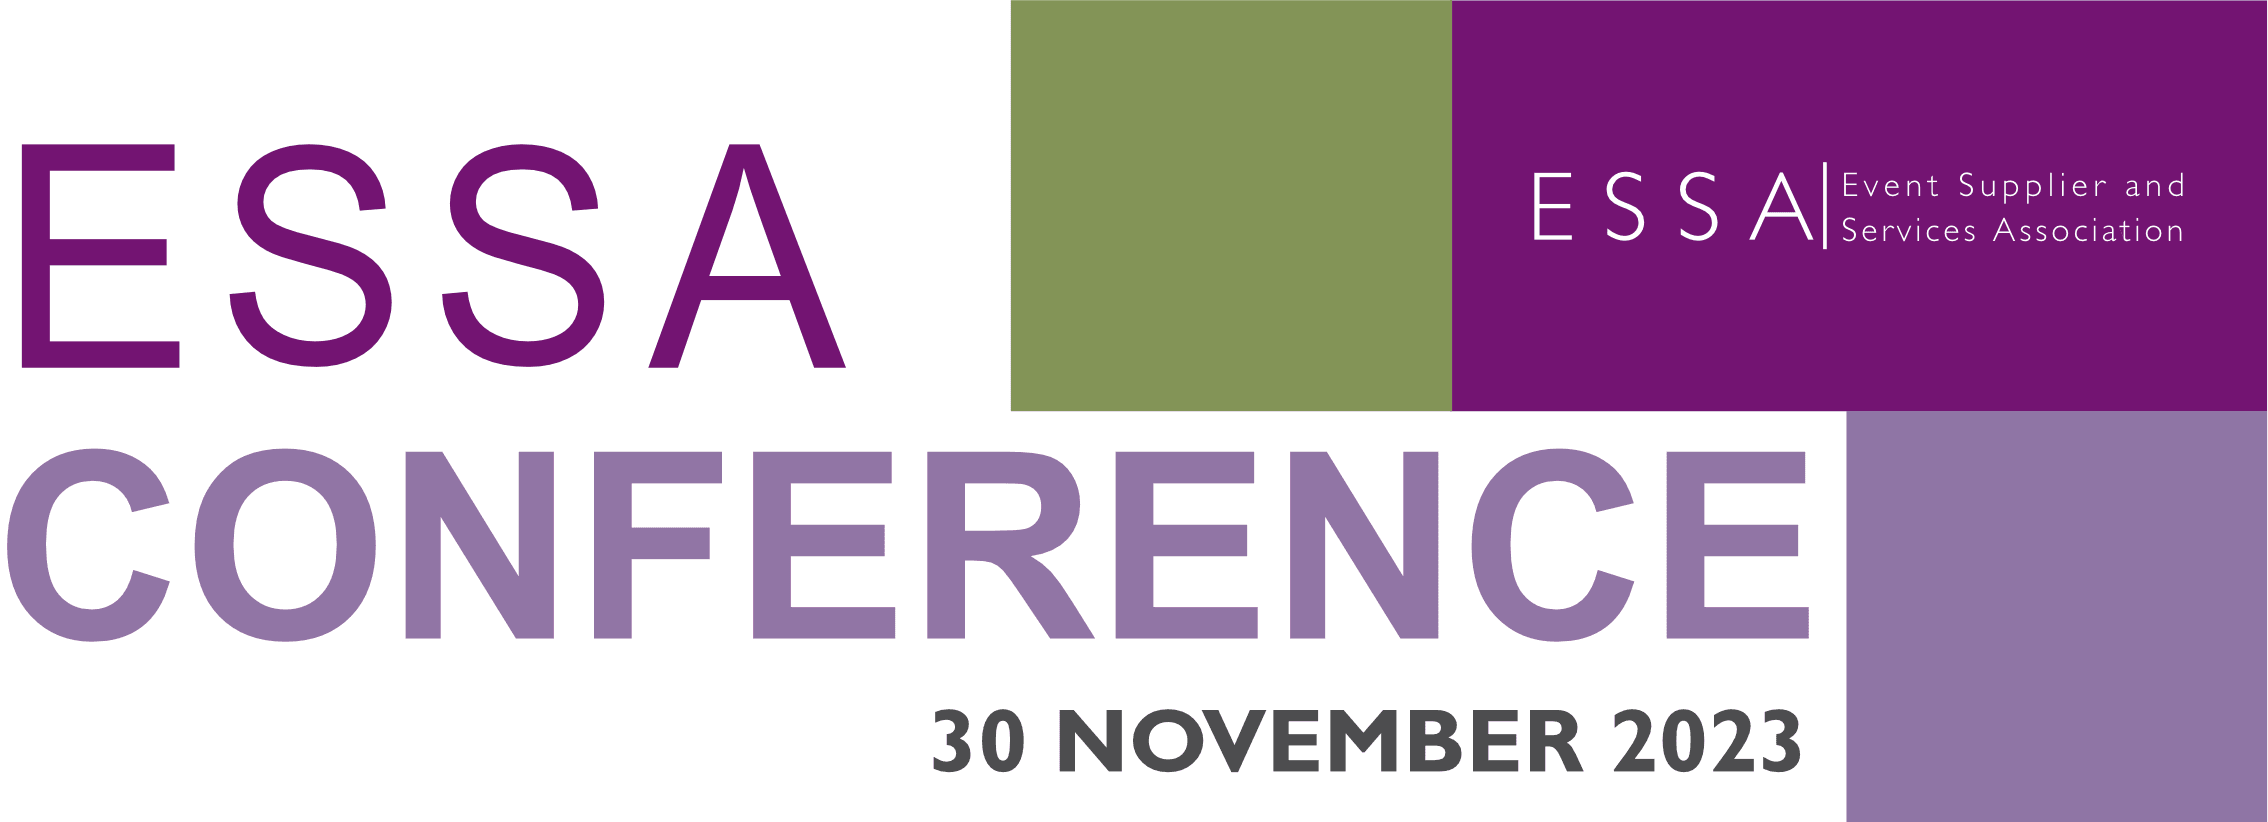 Conference Logo 23